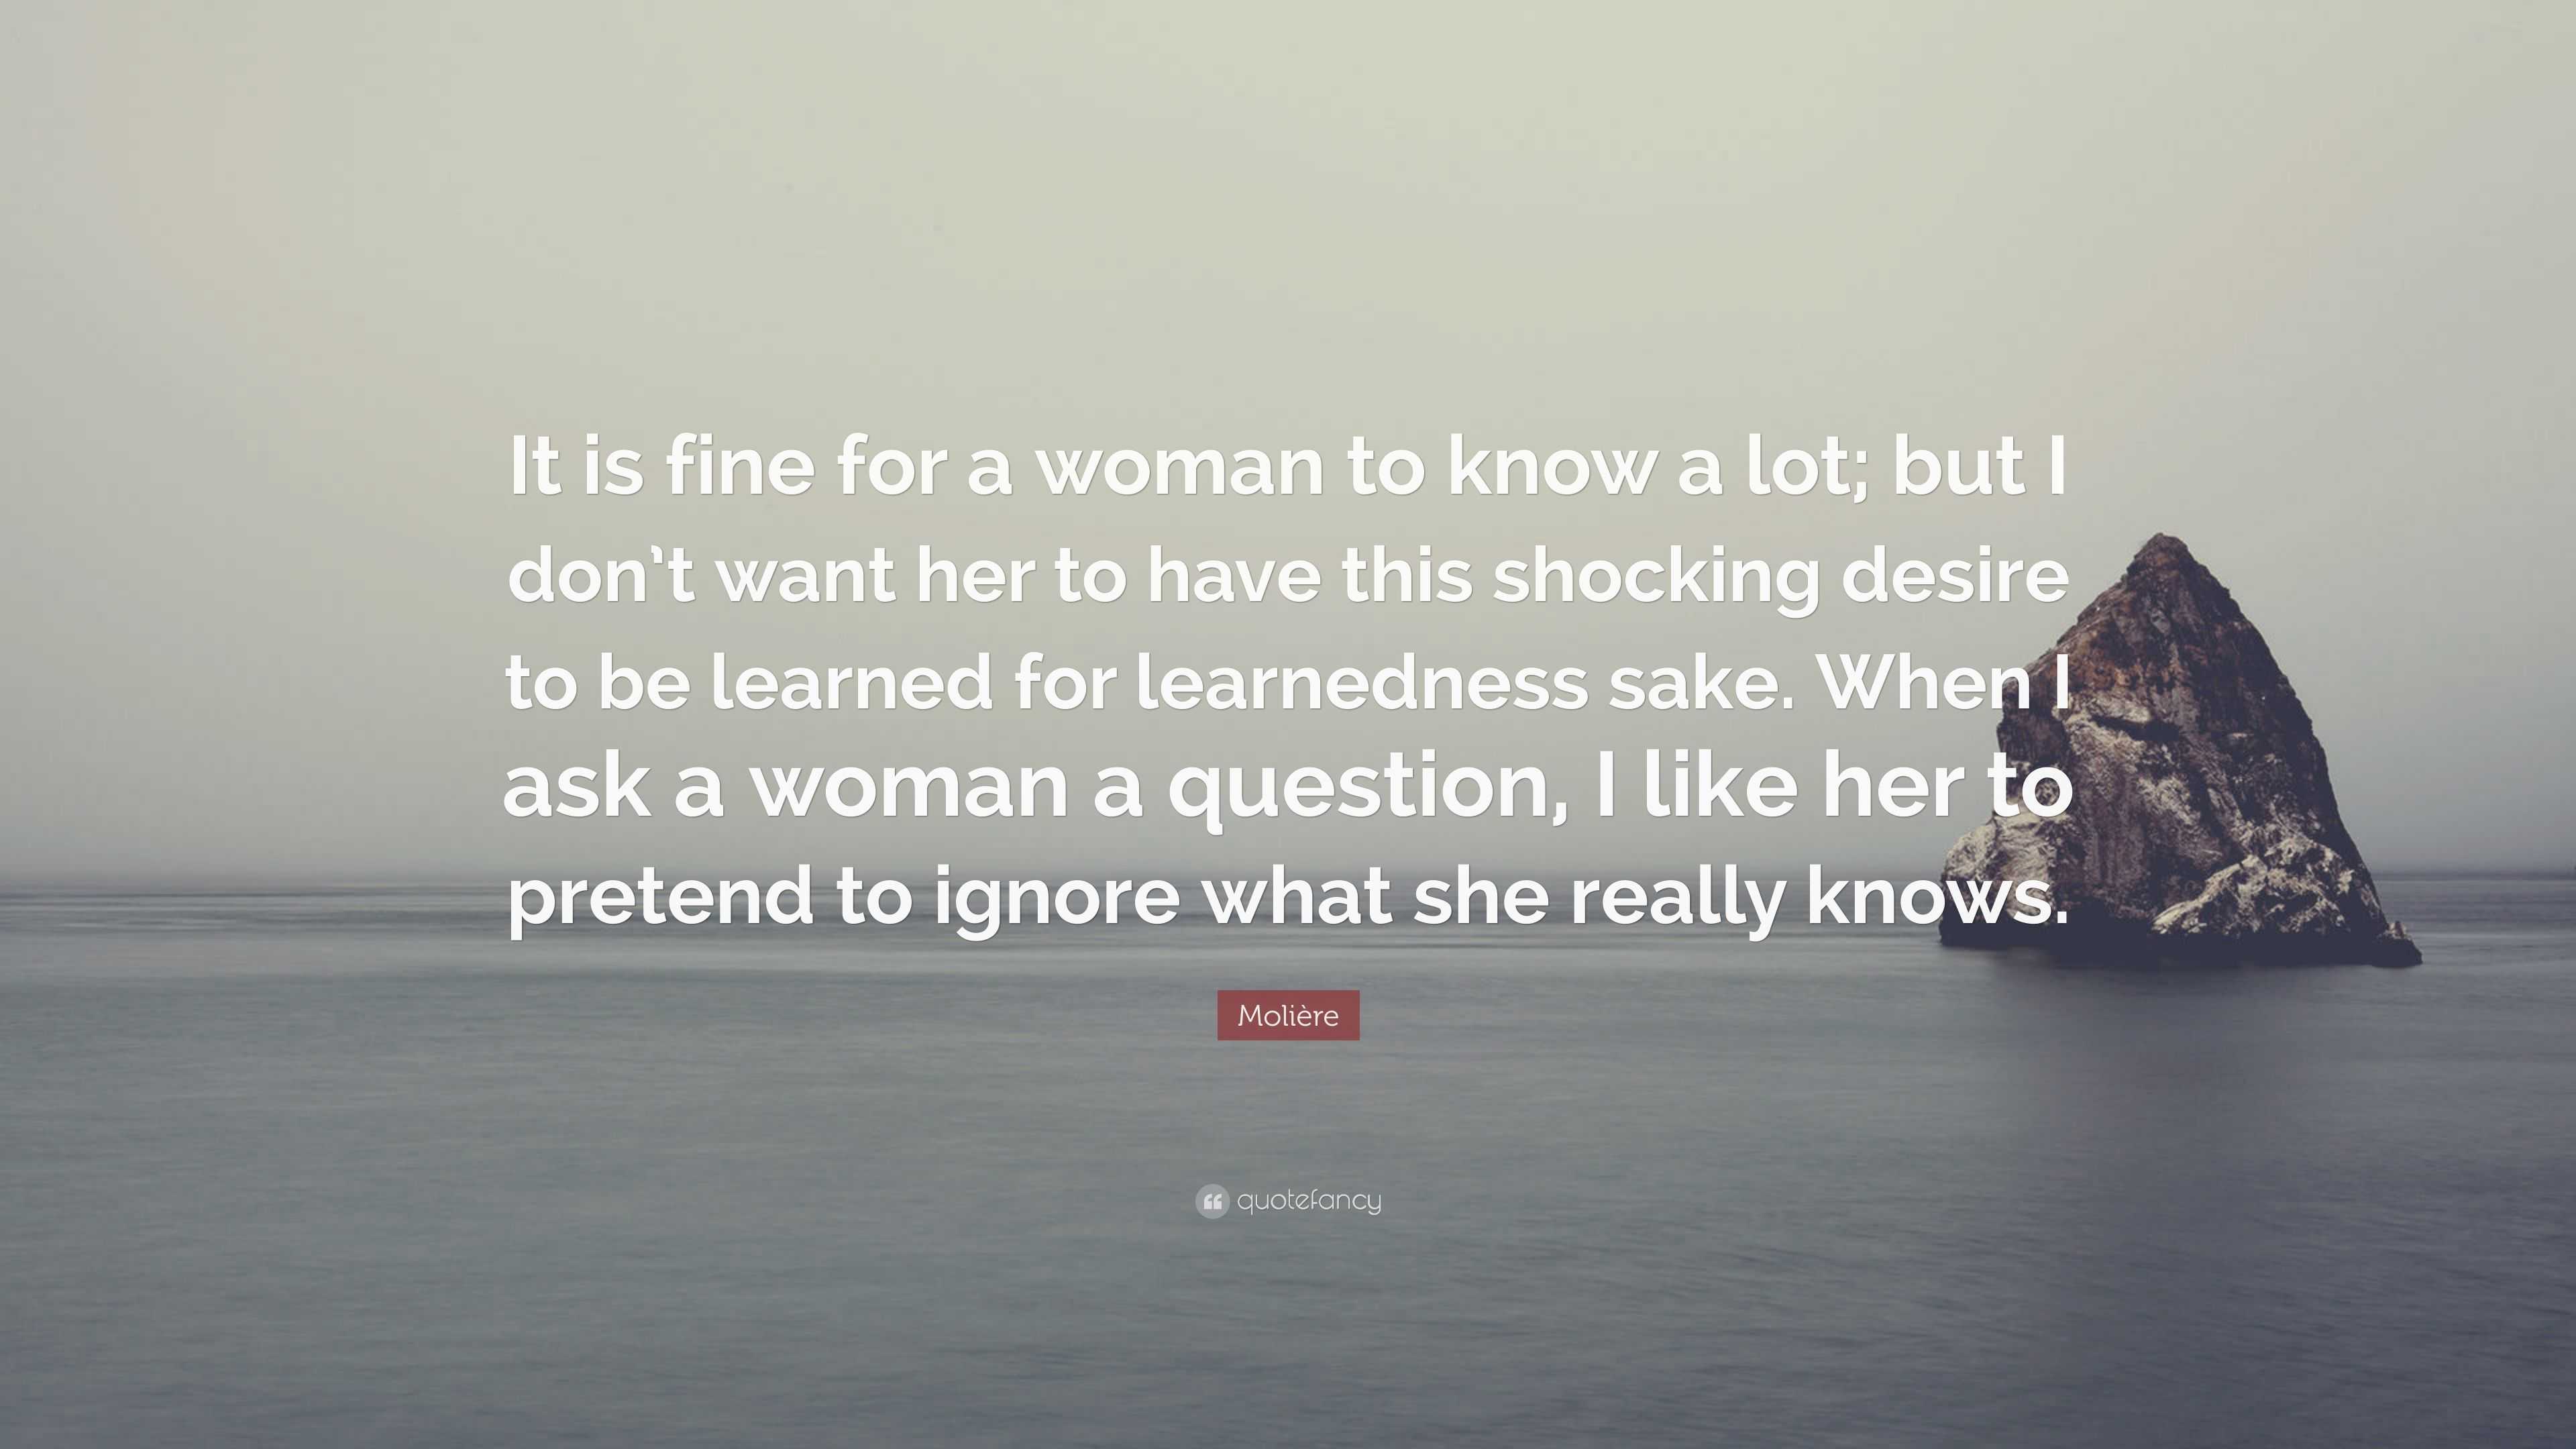 Molière Quote: “It is fine for a woman to know a lot; but I don’t want ...